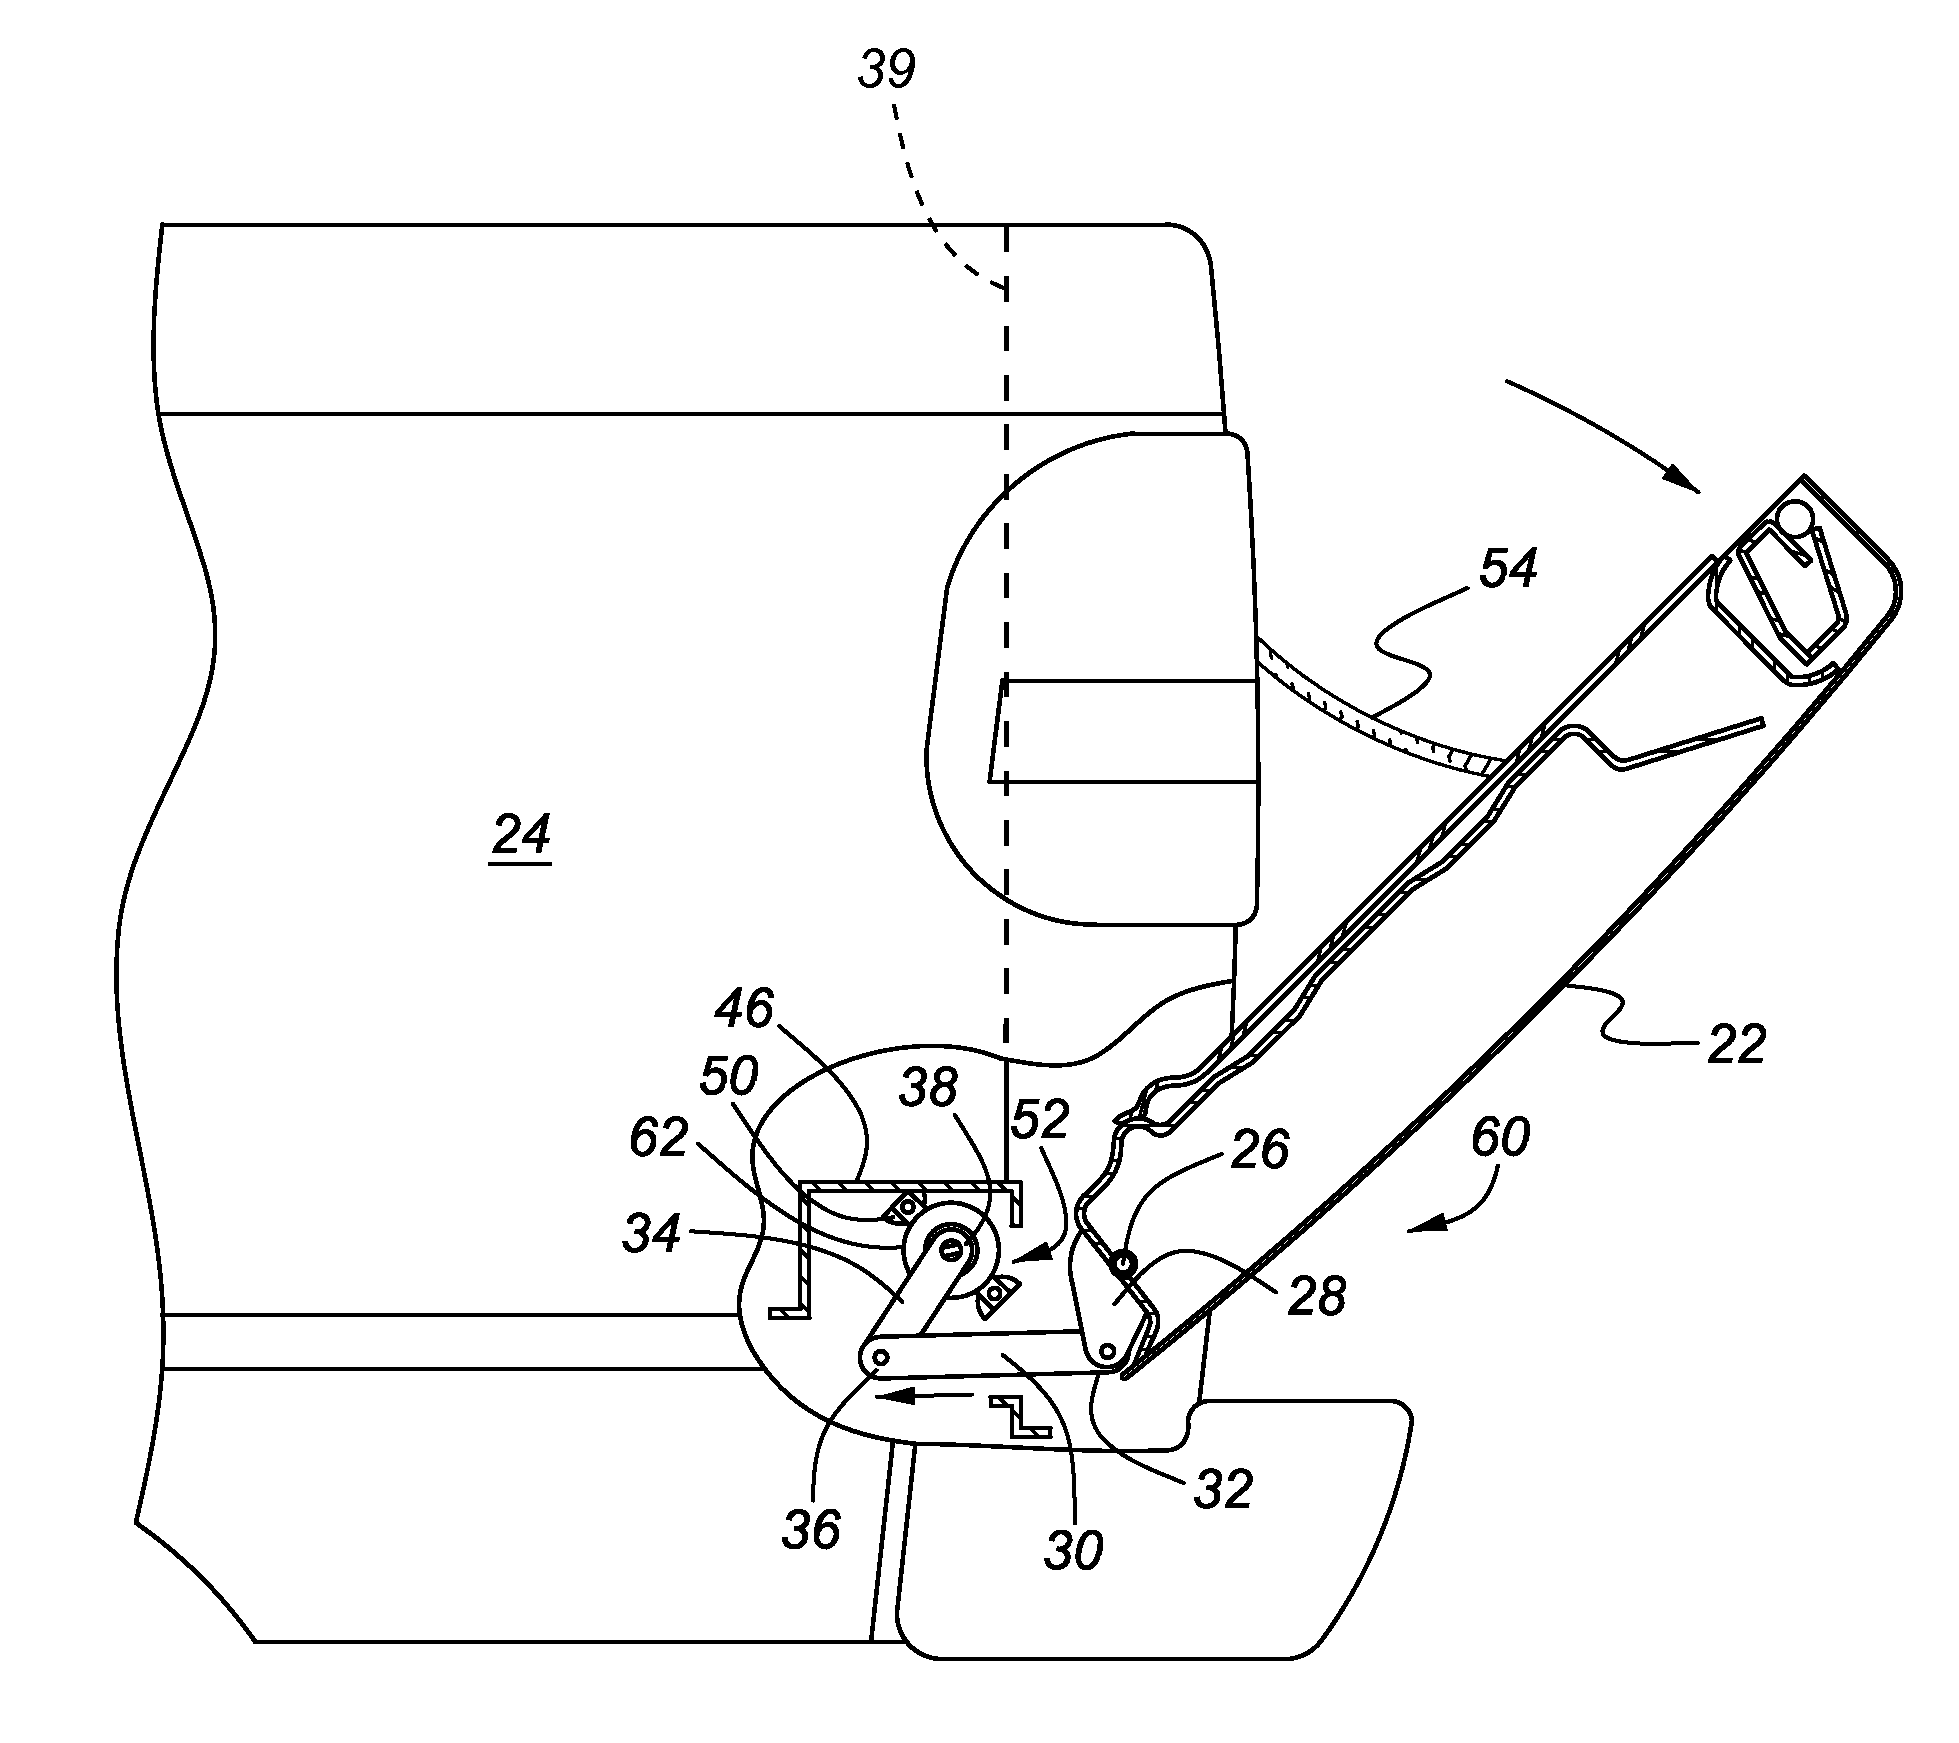 Vehicle tailgate movement assist mechanism using lever driven rotary damper